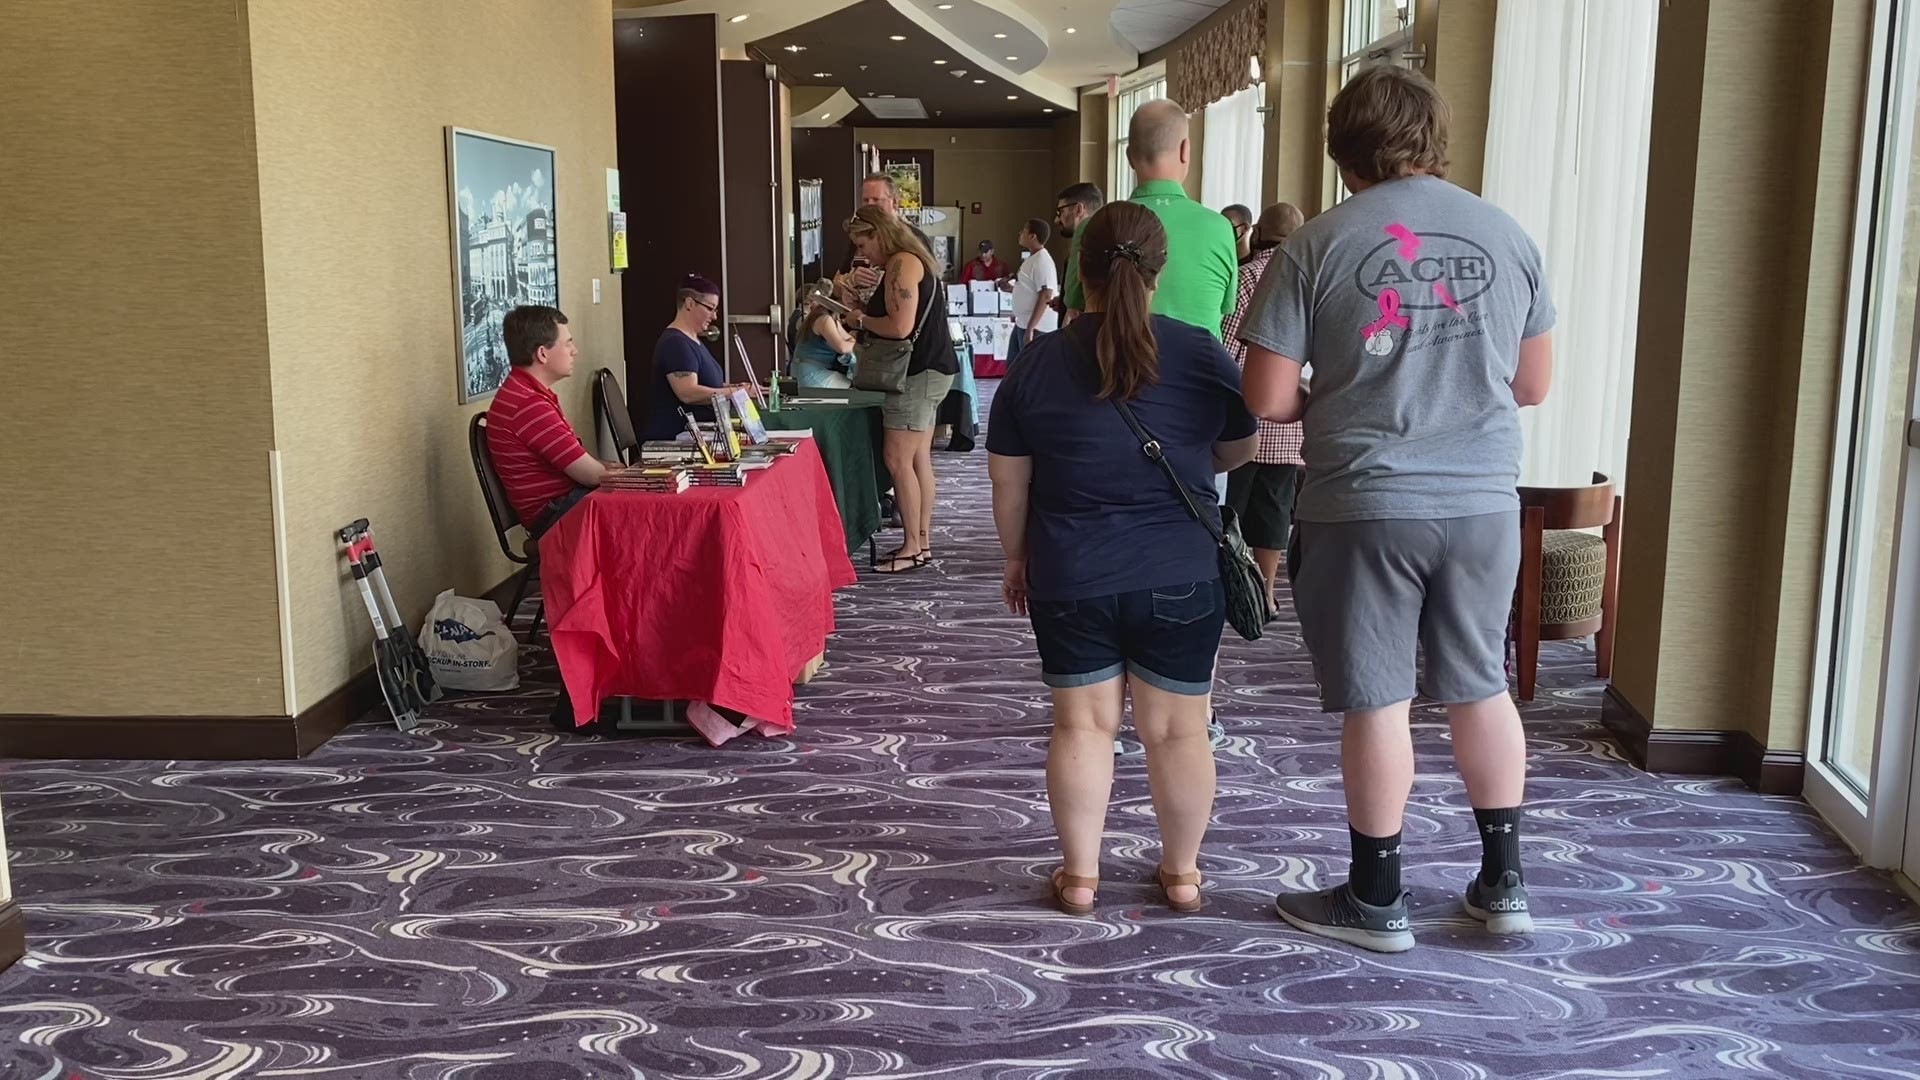 Organizers say they want to bring comic convention to Central Georgia more often.